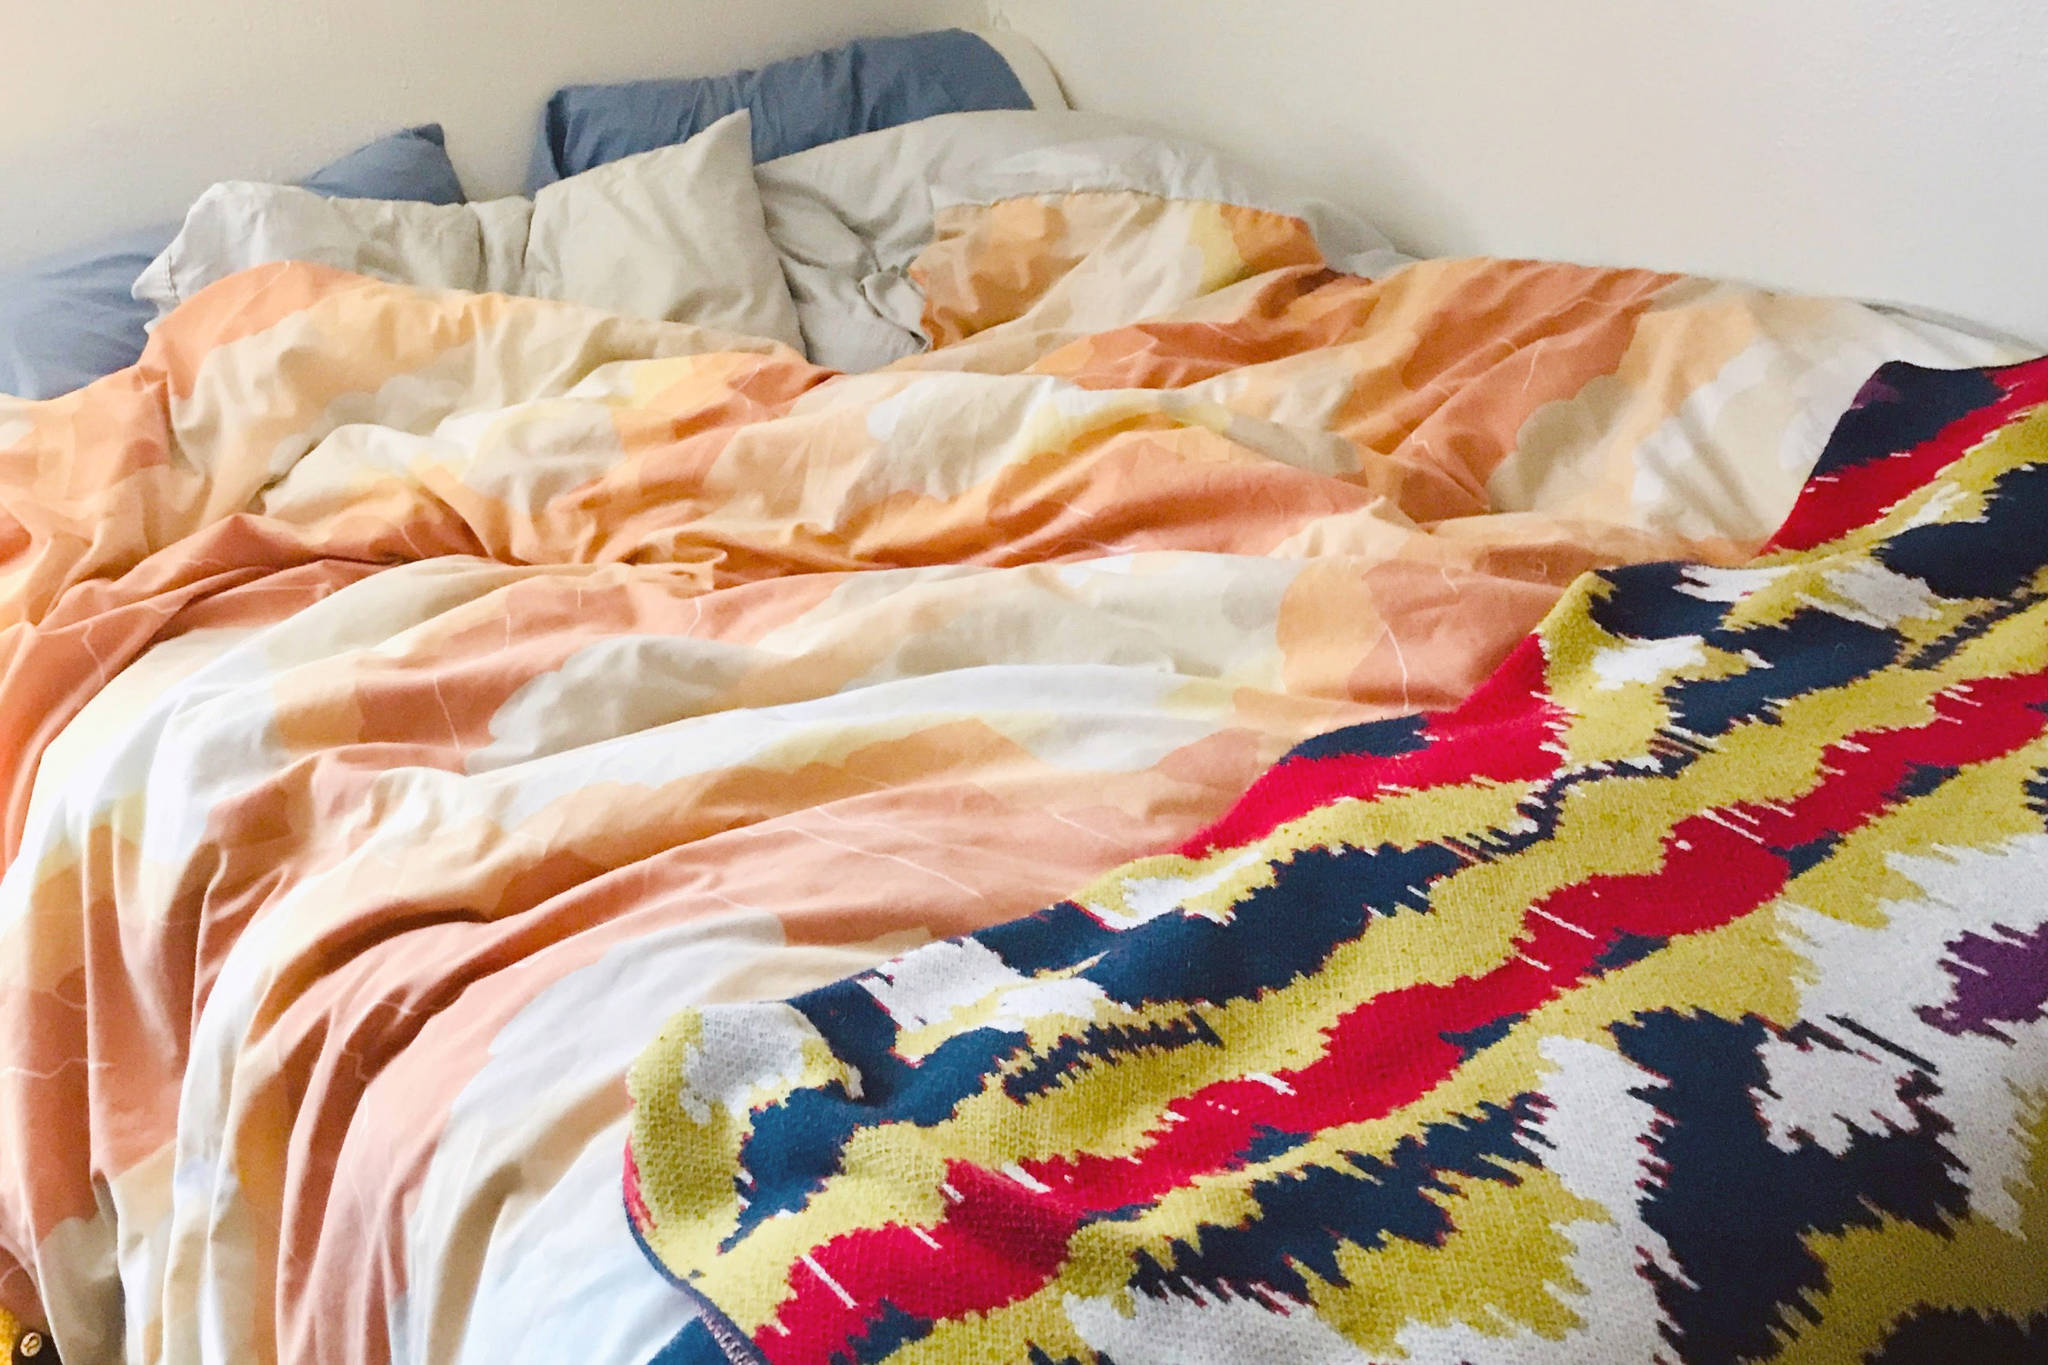 Two blankets gifted at each end of this decade grace the author’s bed. (Photo by Kat Sorensen)